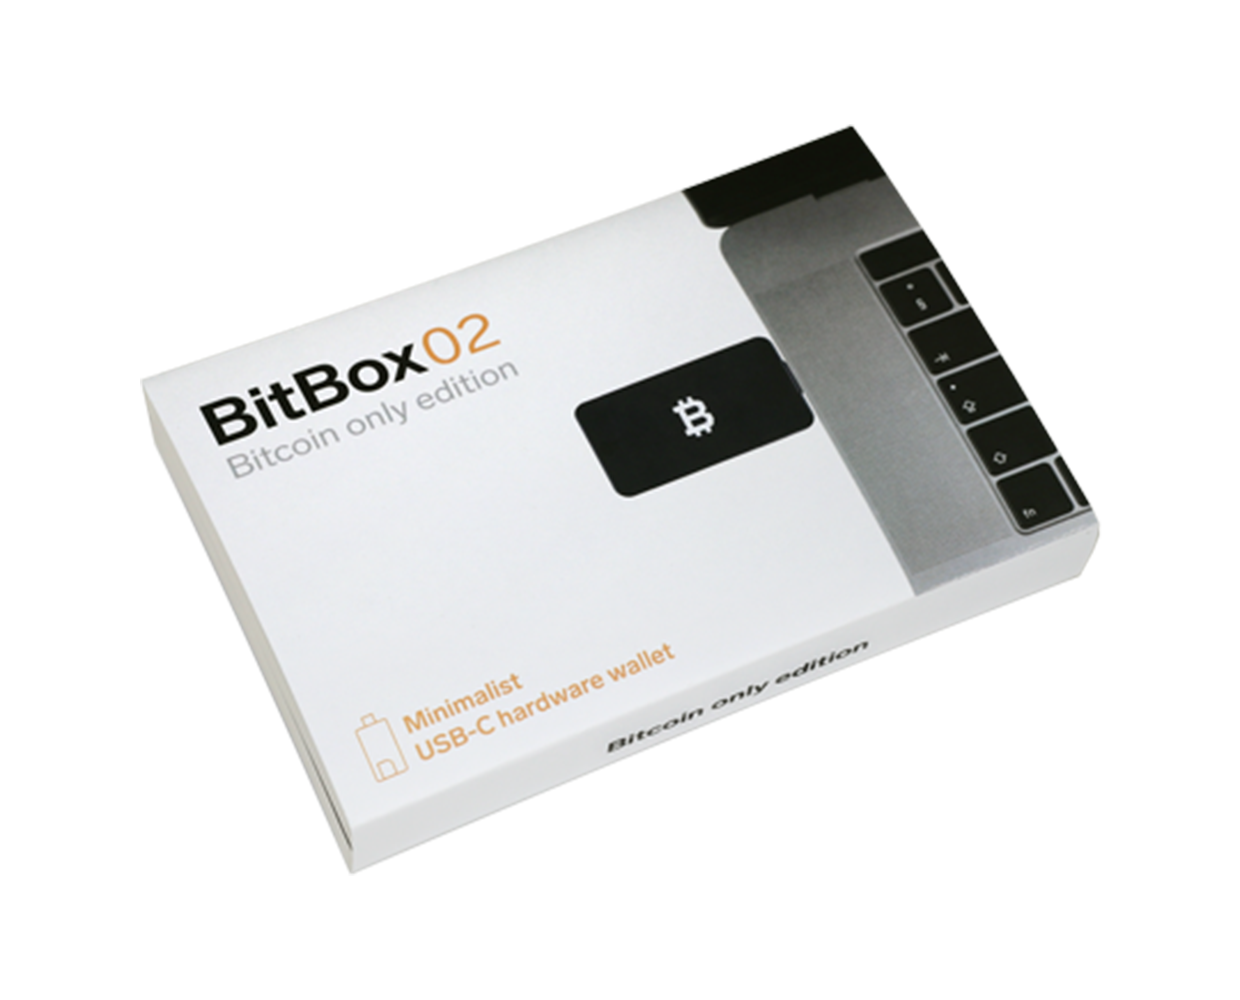 BitBox02 Hardware Wallet (Bitcoin Only Edition) by Shift Crypto